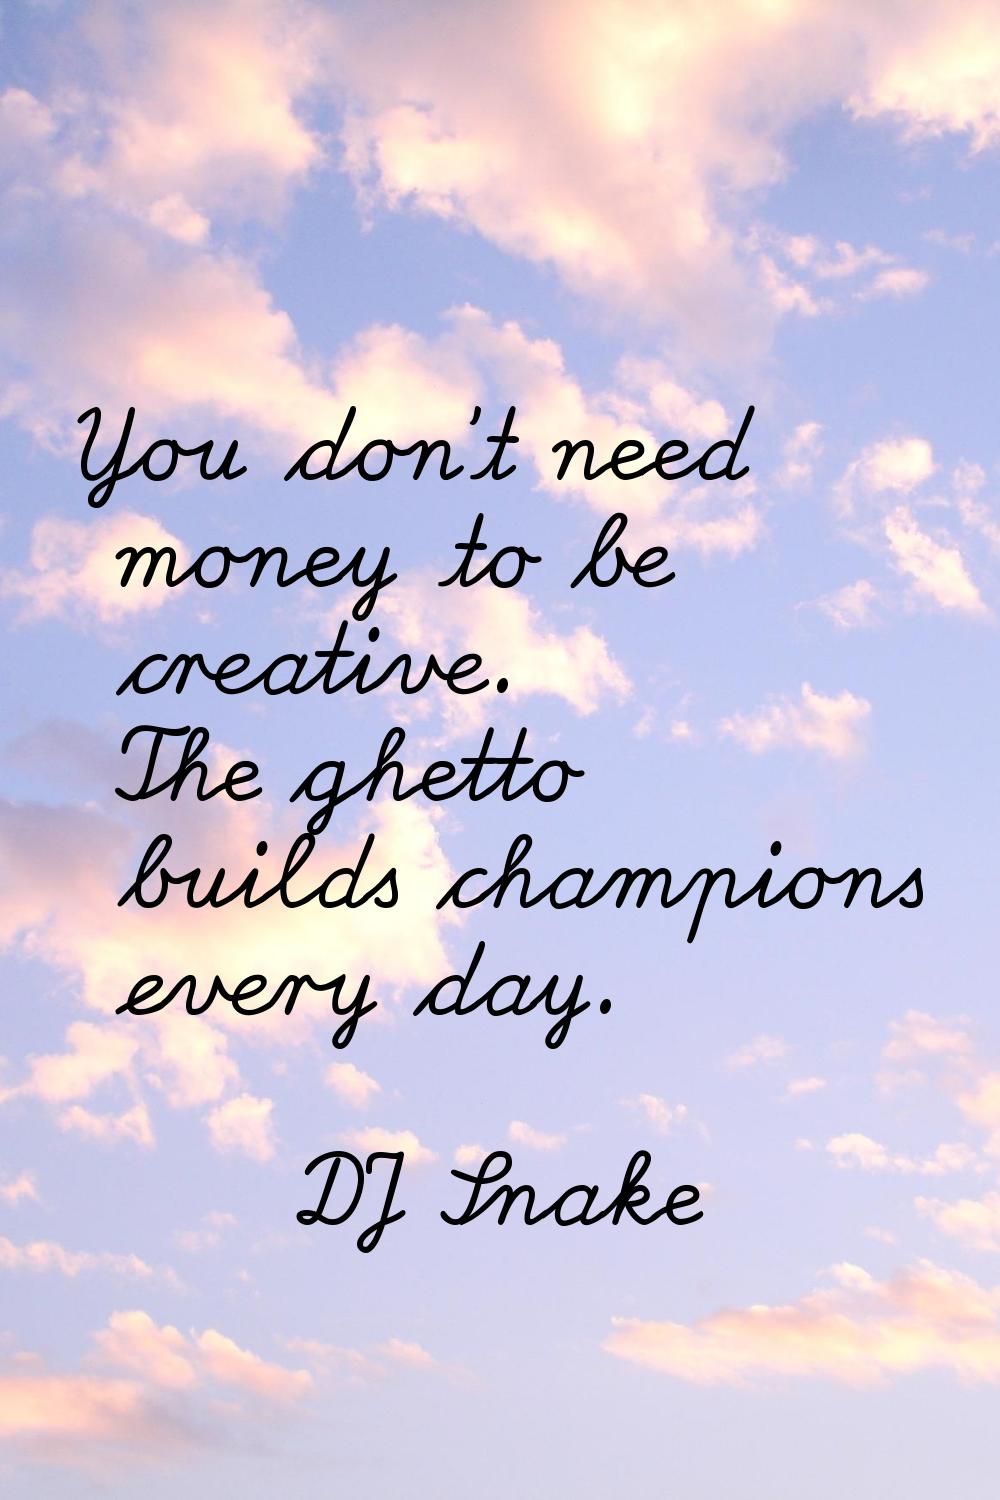 You don't need money to be creative. The ghetto builds champions every day.